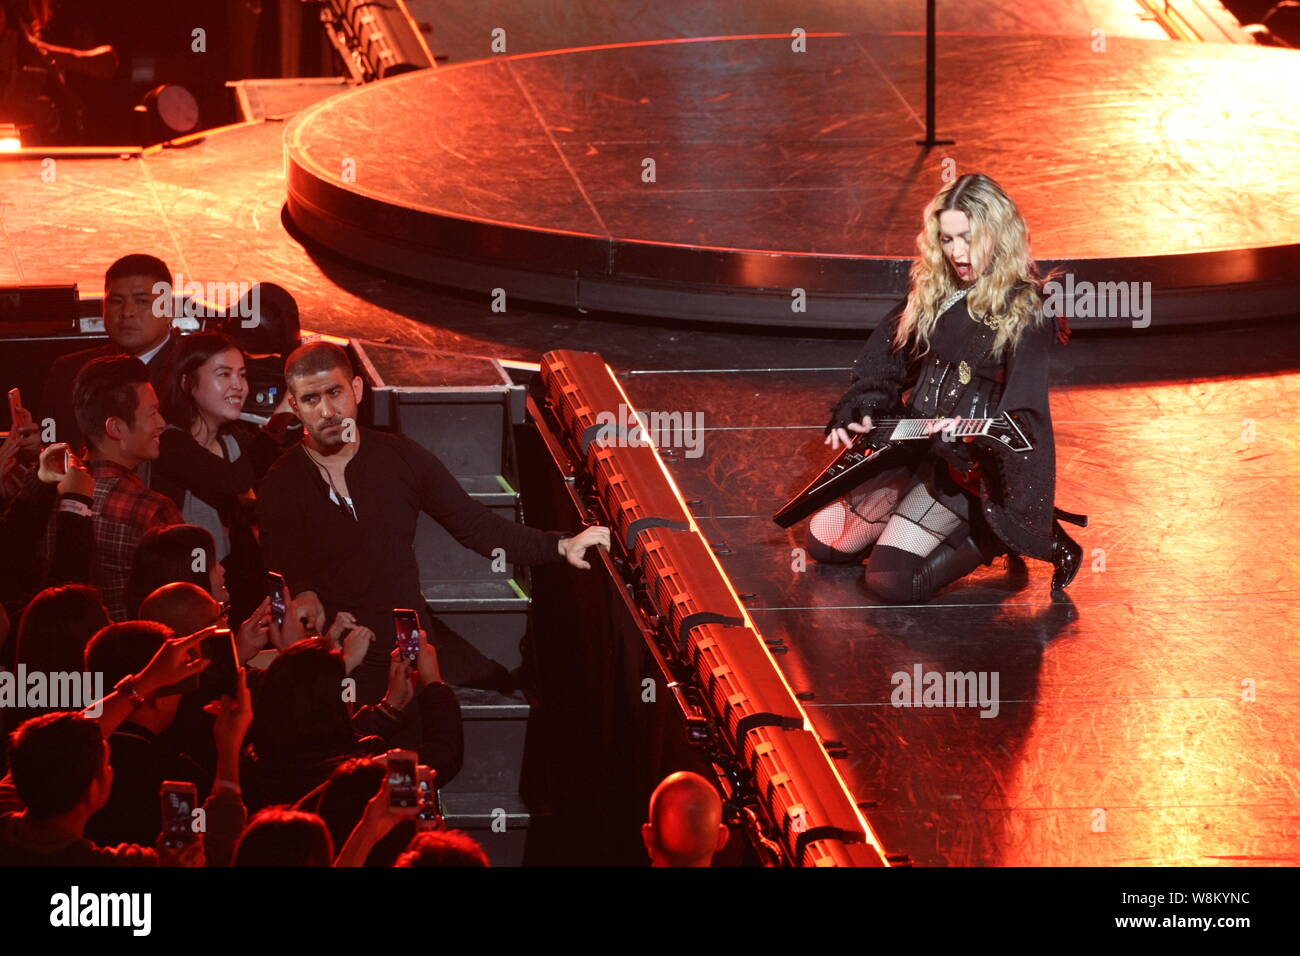 American singer Madonna performs at a concert during The Rebel Heart World Tour in Macau, China, 20 February 2016. Stock Photo